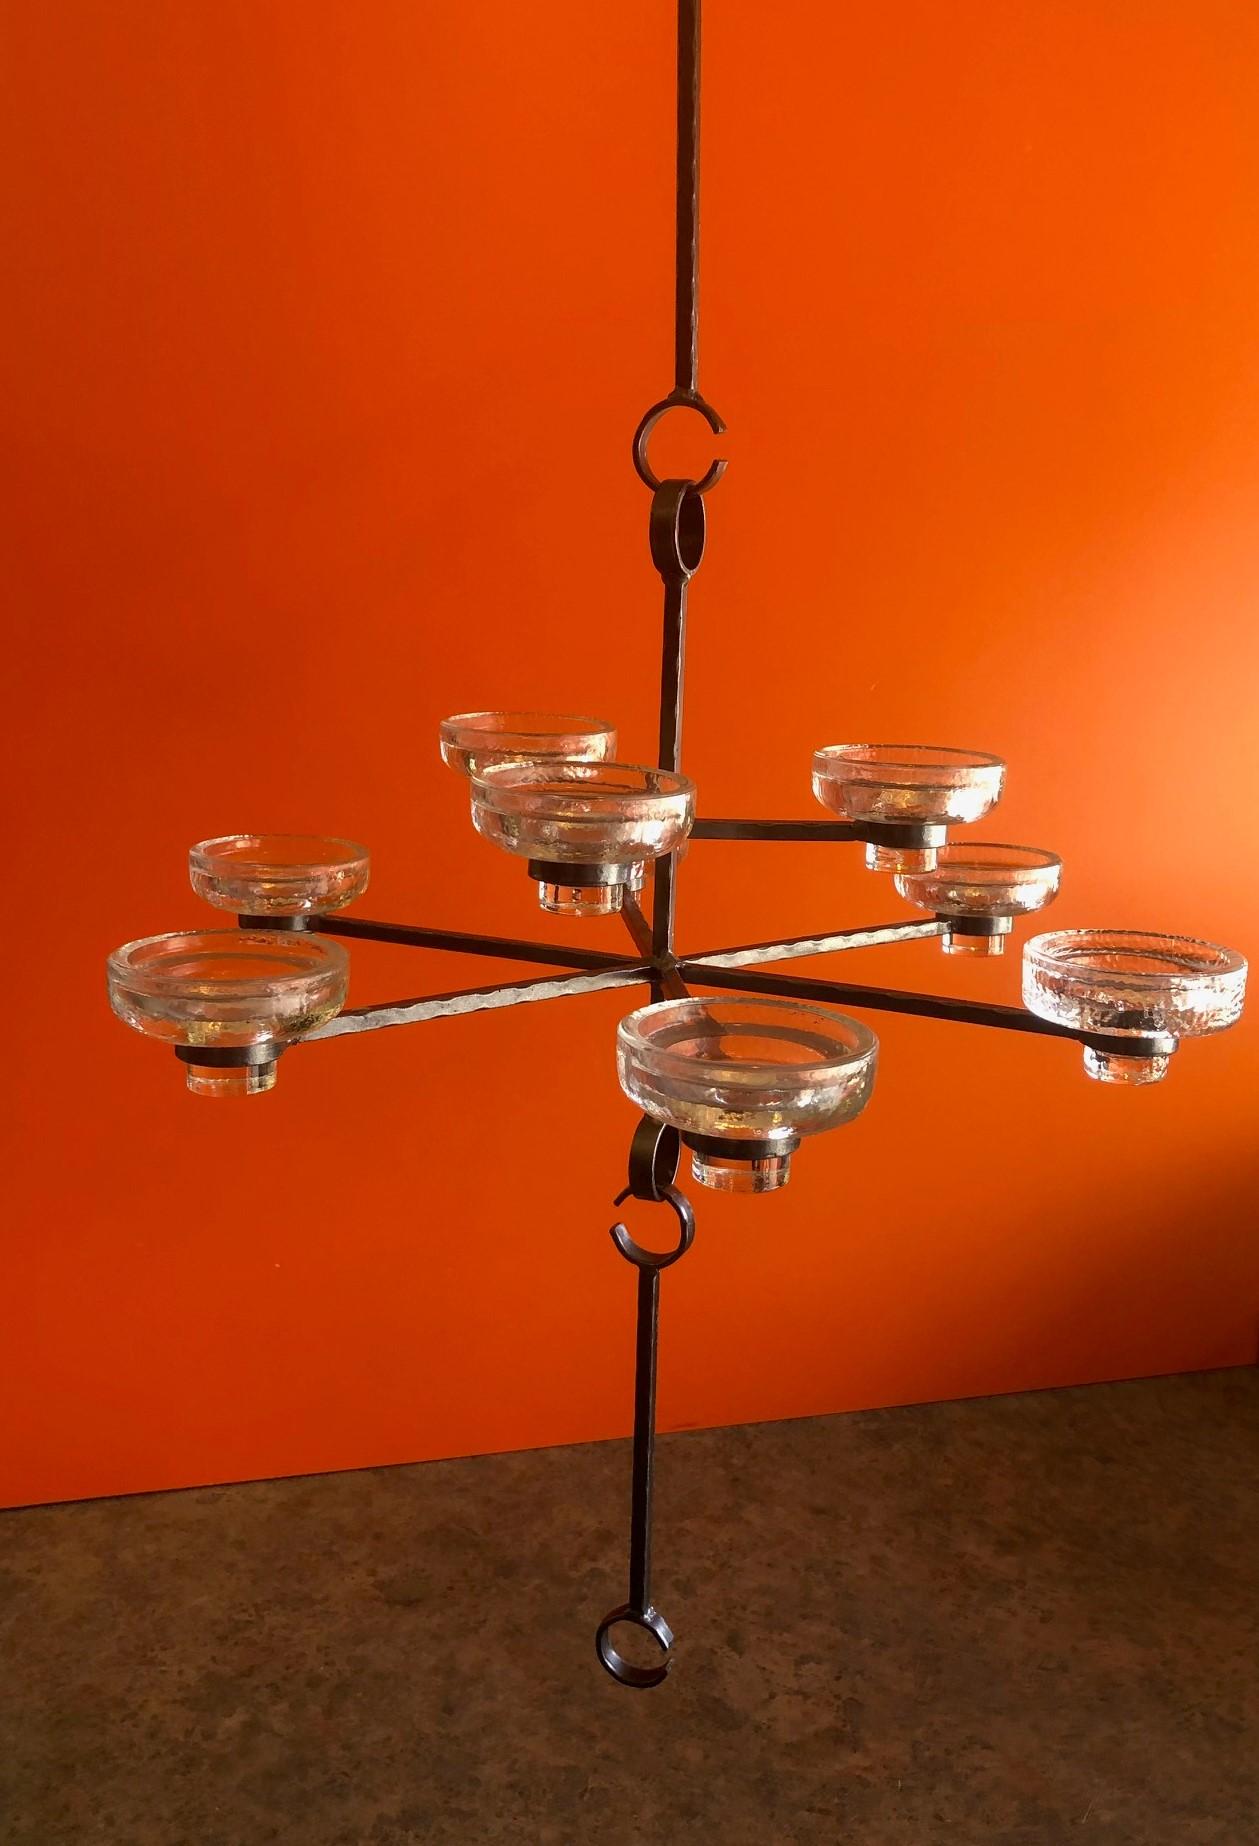 Gorgeous nine-candle chandelier by Erik Hoglund for Kosta Boda, circa 1960s. The chandelier which is made of wrought iron and glass was designed and manufactured in Sweden. 

There are nine glass candle holders (that measure 2